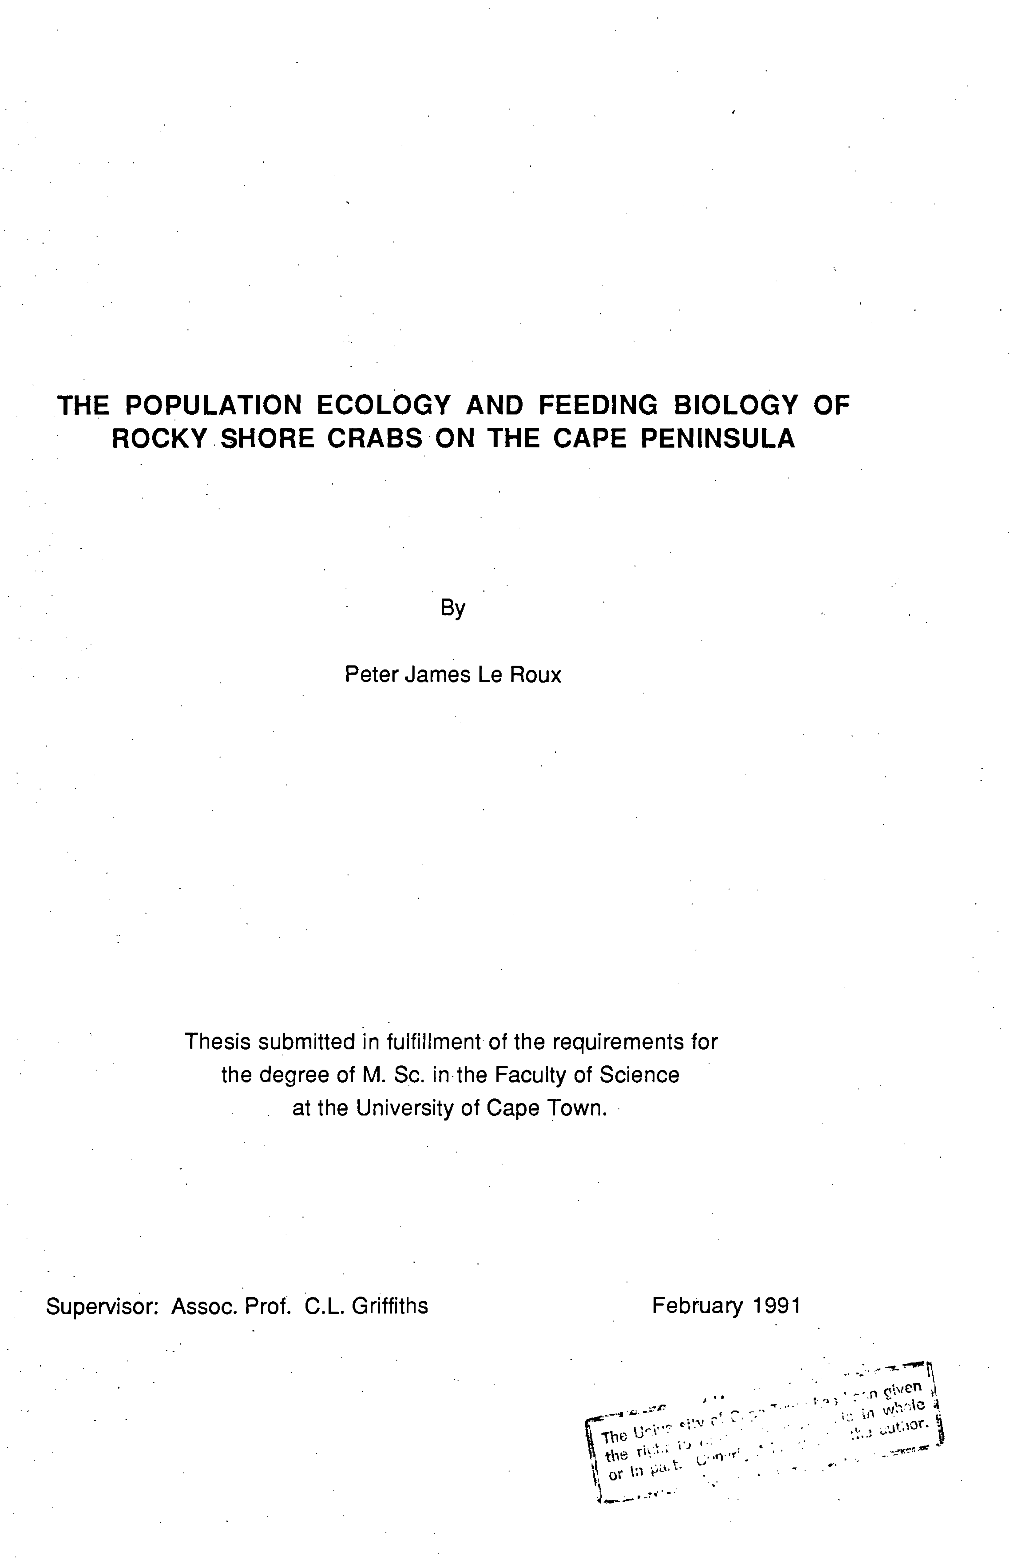 The Population Ecology and Feeding Biology of Rocky Shore Crabs On